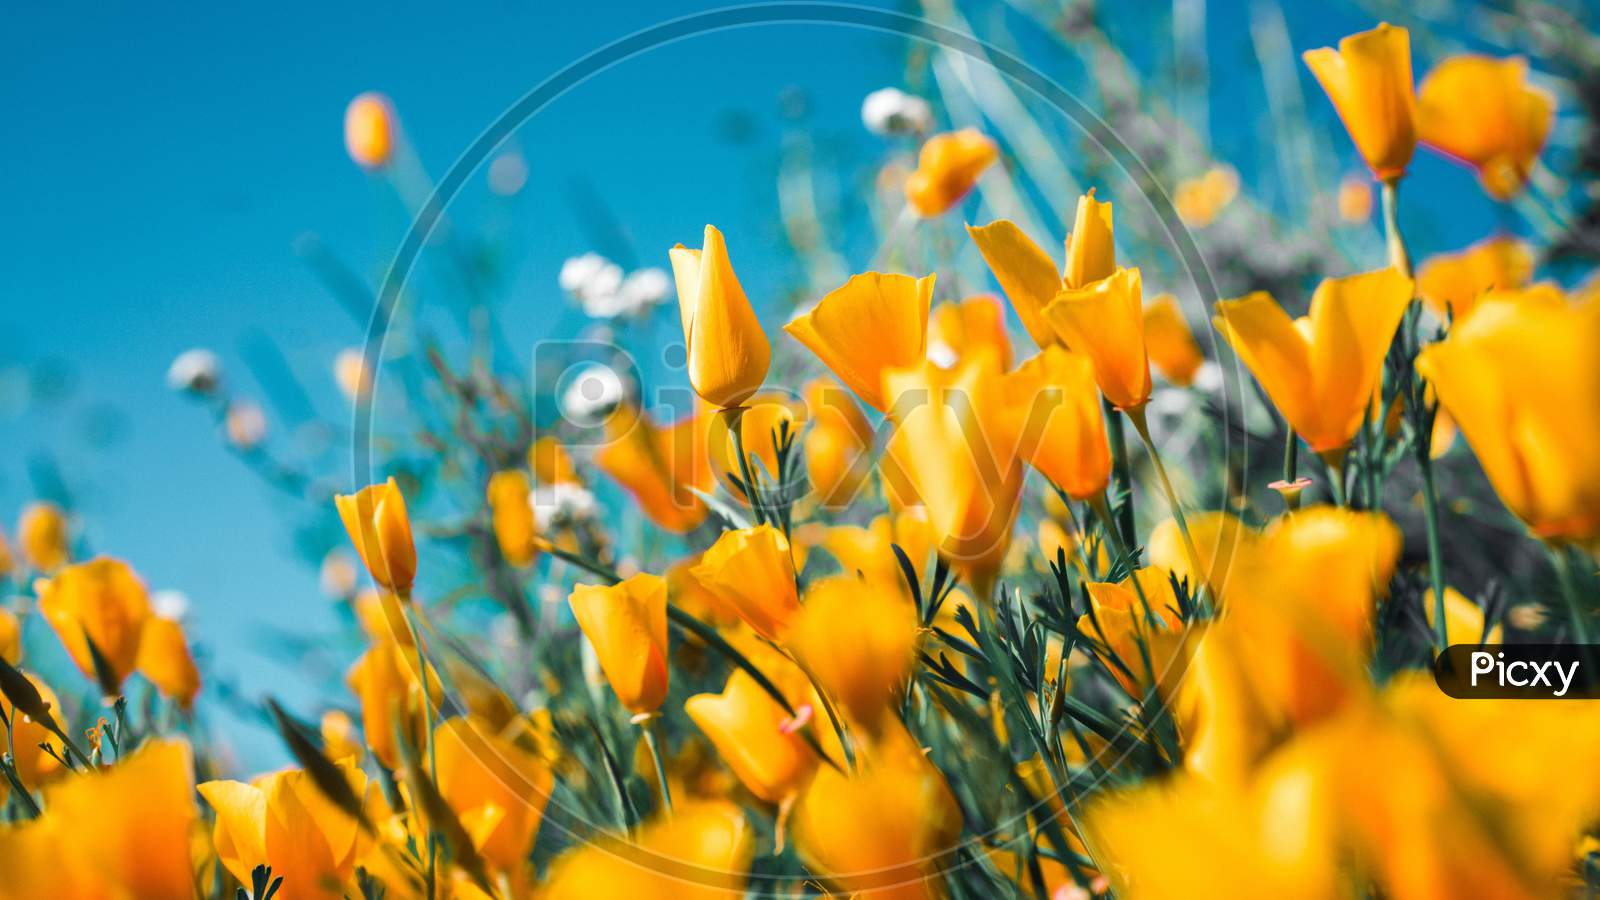 Beautiful spring background with close-up of a group of blooming purple, yellow crocus flowers in spring garden.